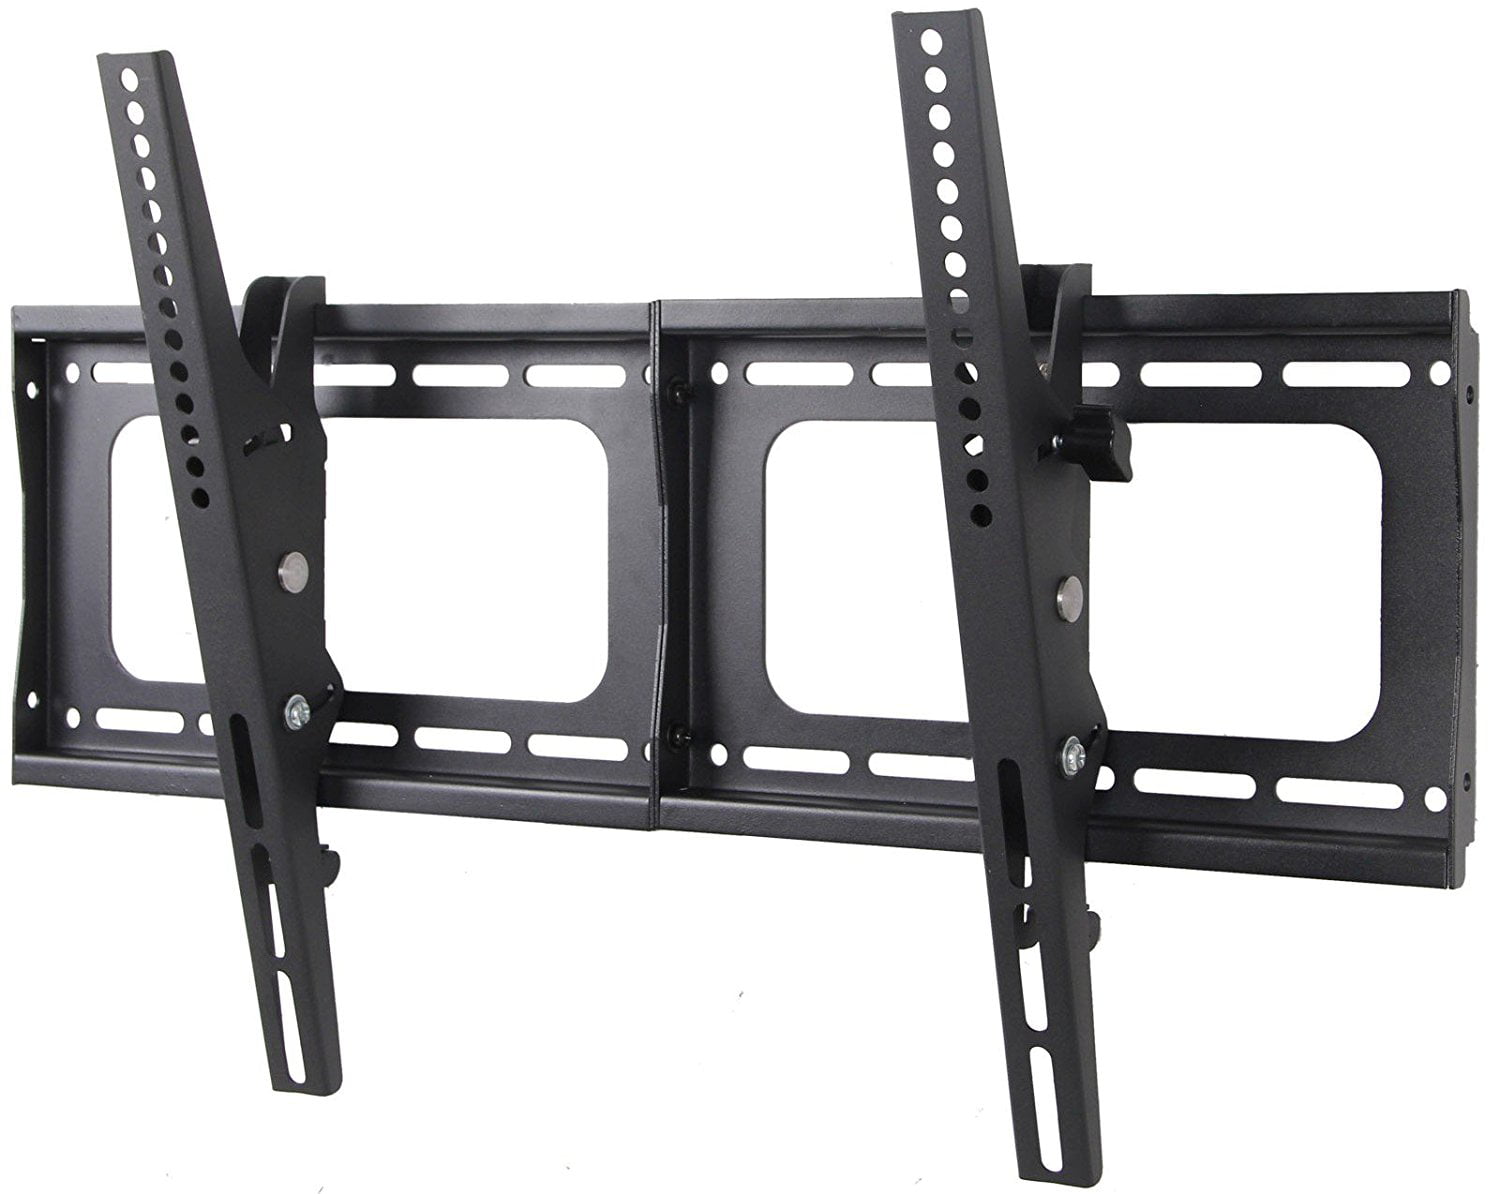 Tilt TV Wall Mount Bracket up to 85" and 132 lbs fits 16" 24" and 32" Wall Studs 